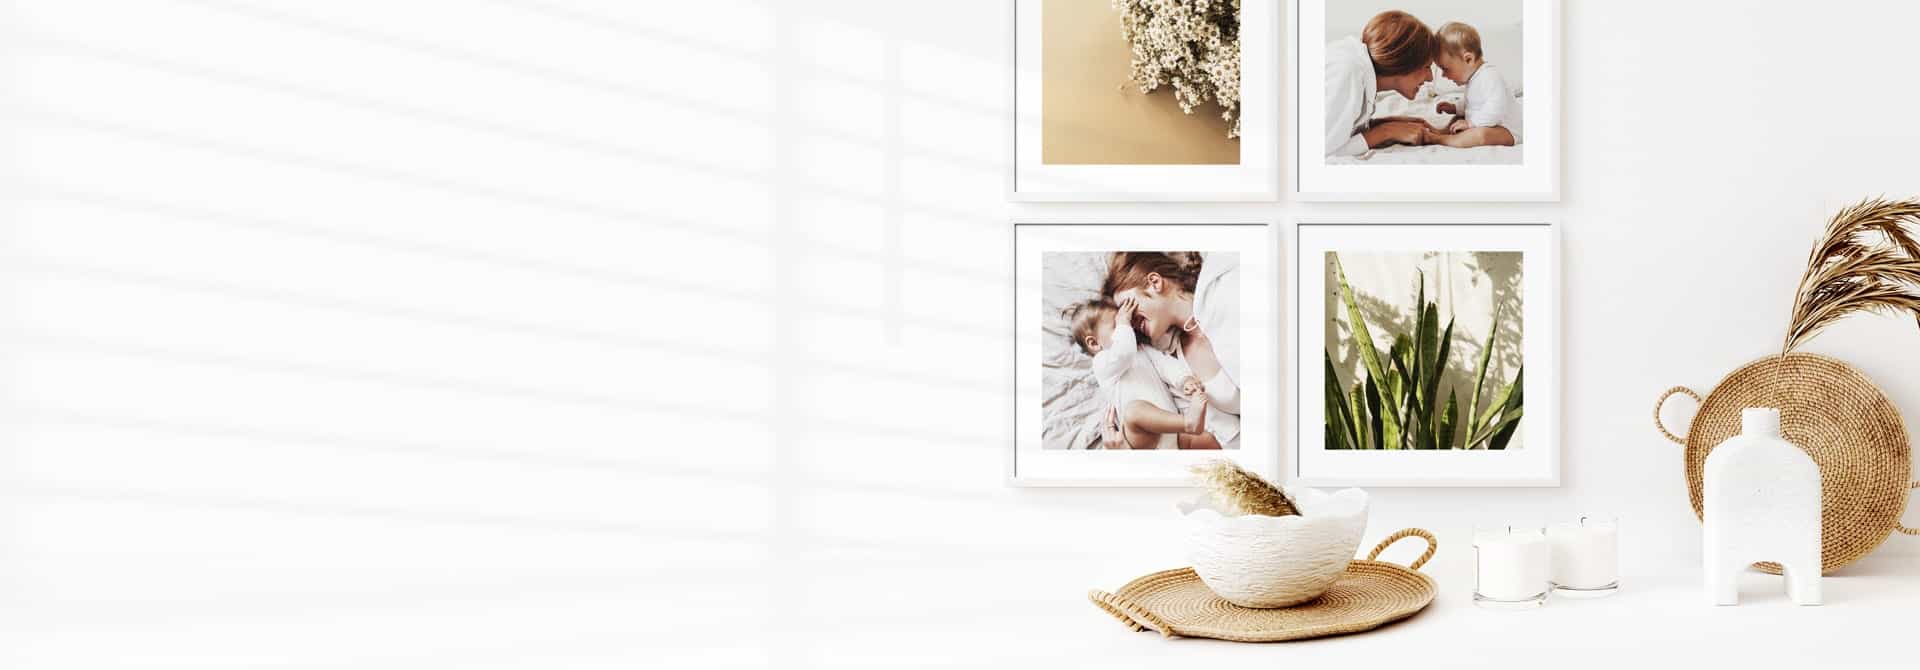 CusttomFrames. Lightweight photo frames that you can quickly and easily stick to your wall!